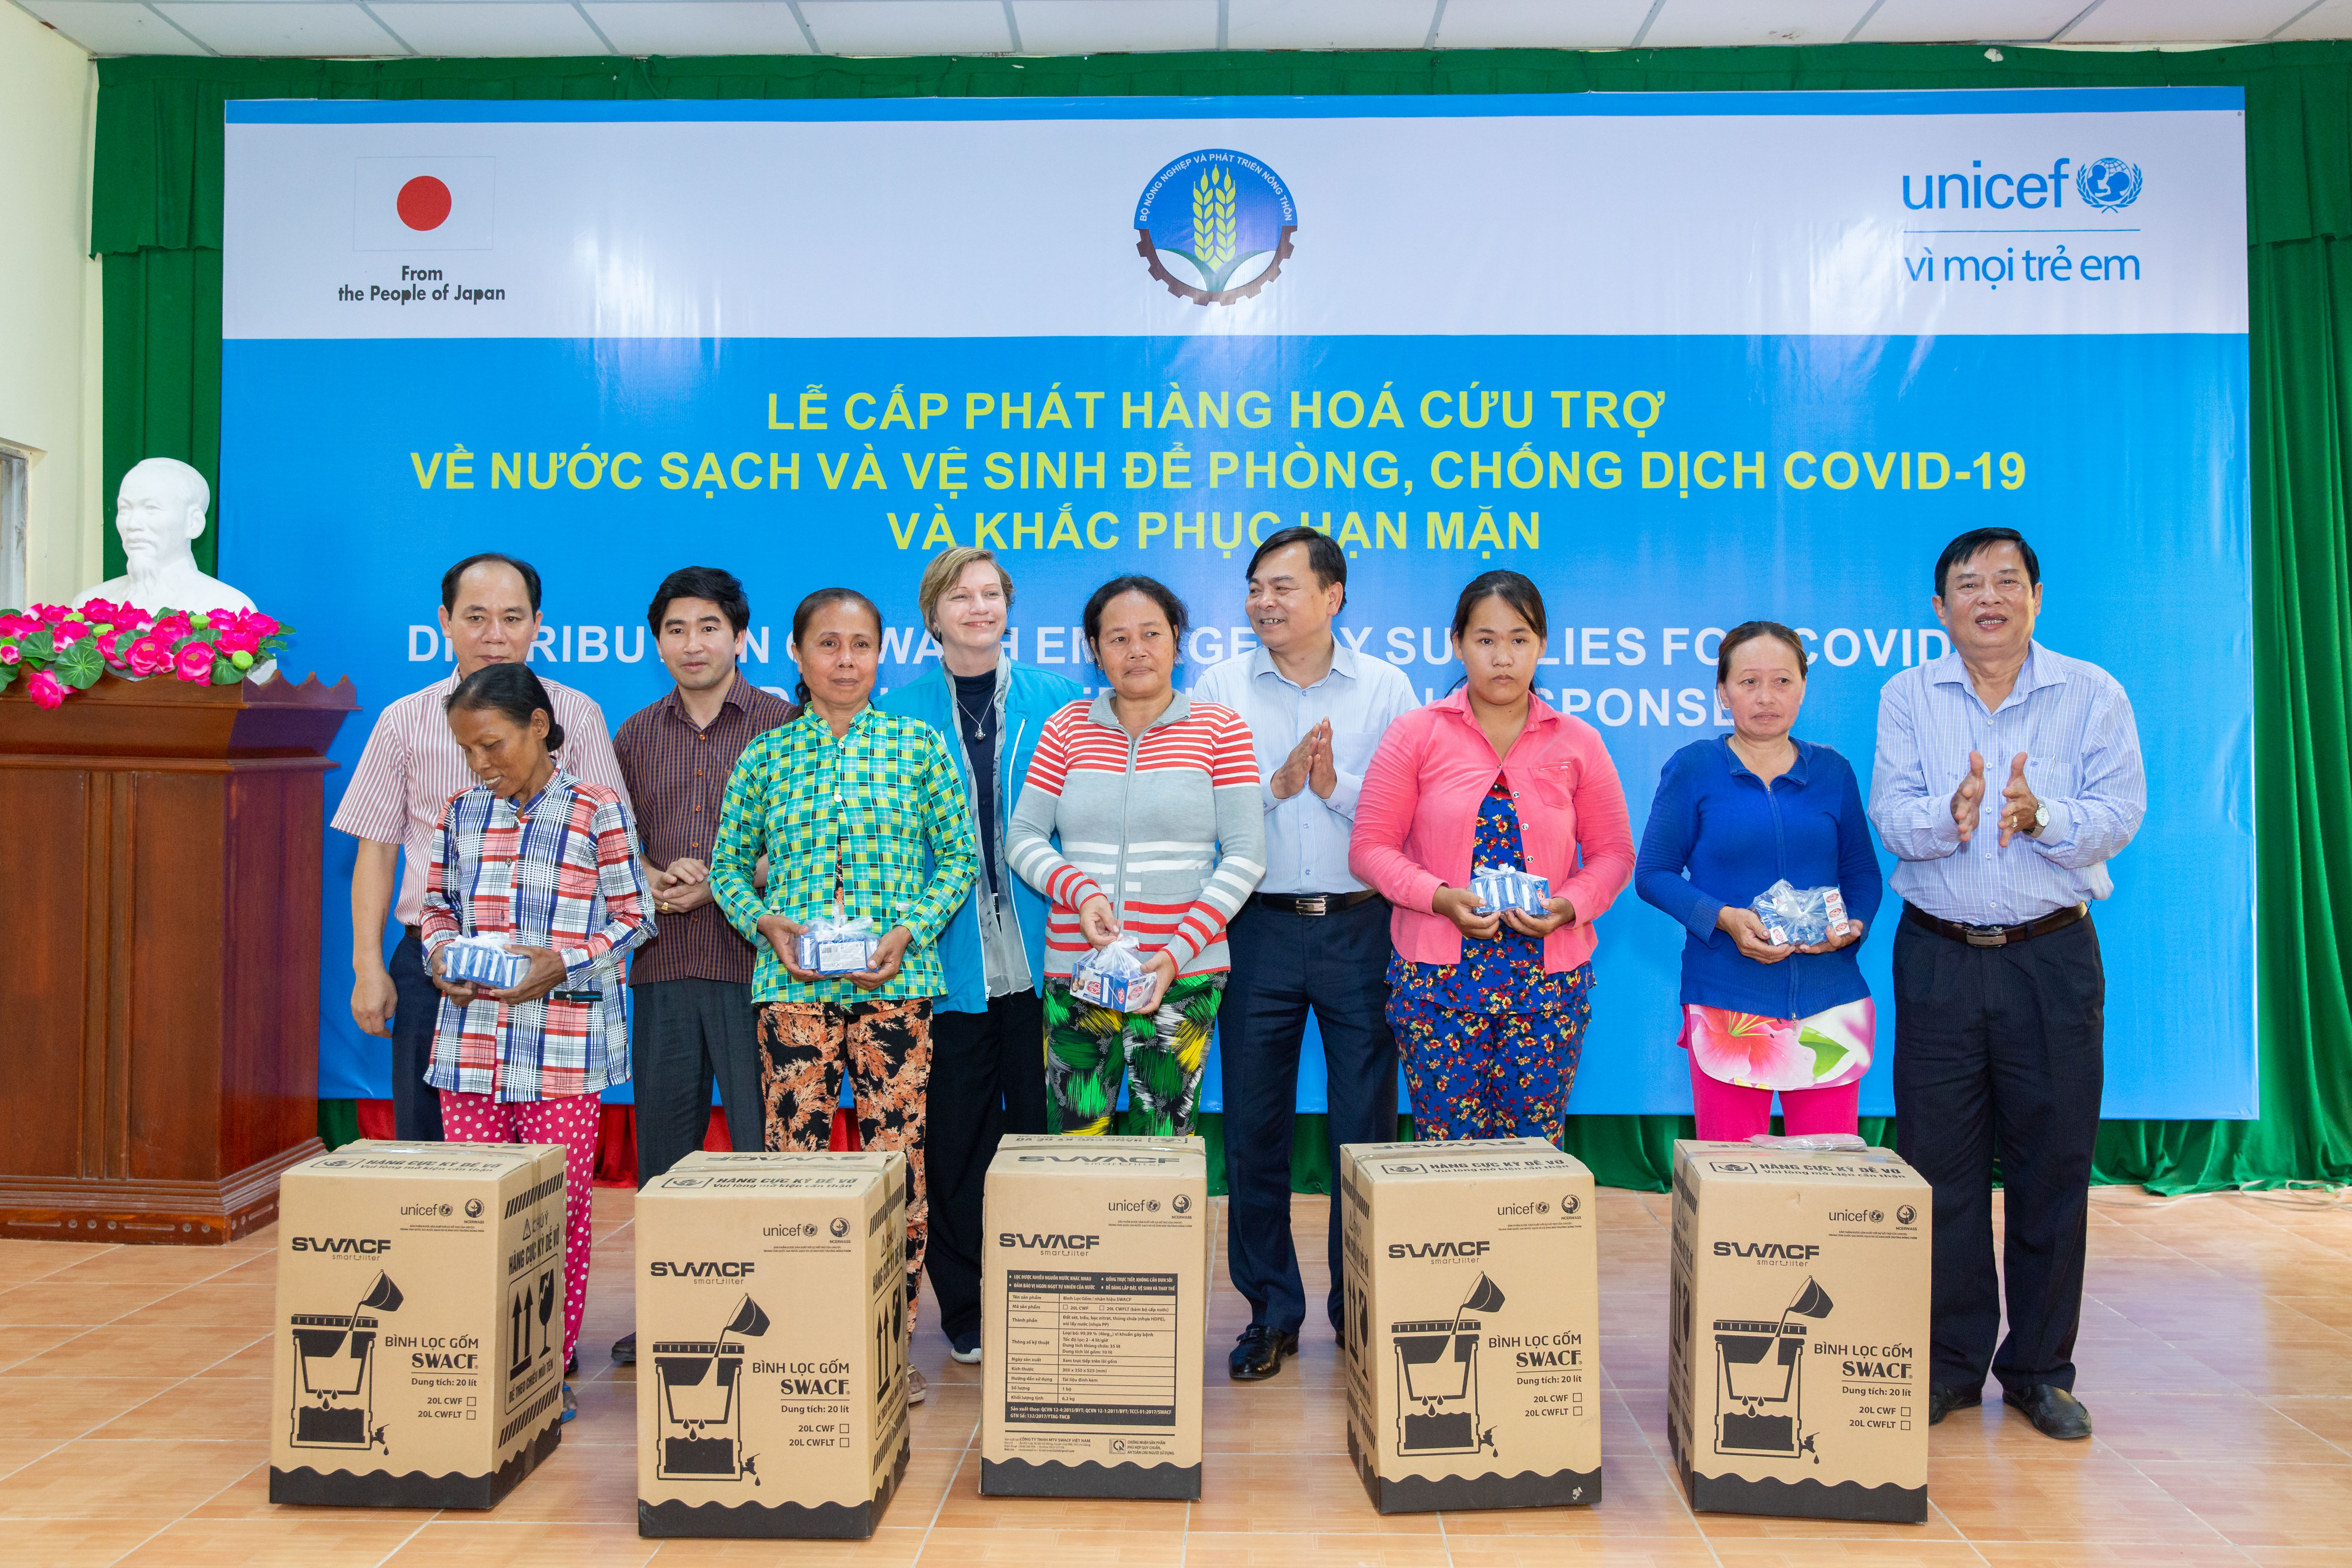 UNICEF distributes life-saving supplies to over 340,000 people in Vietnam in response to COVID-19